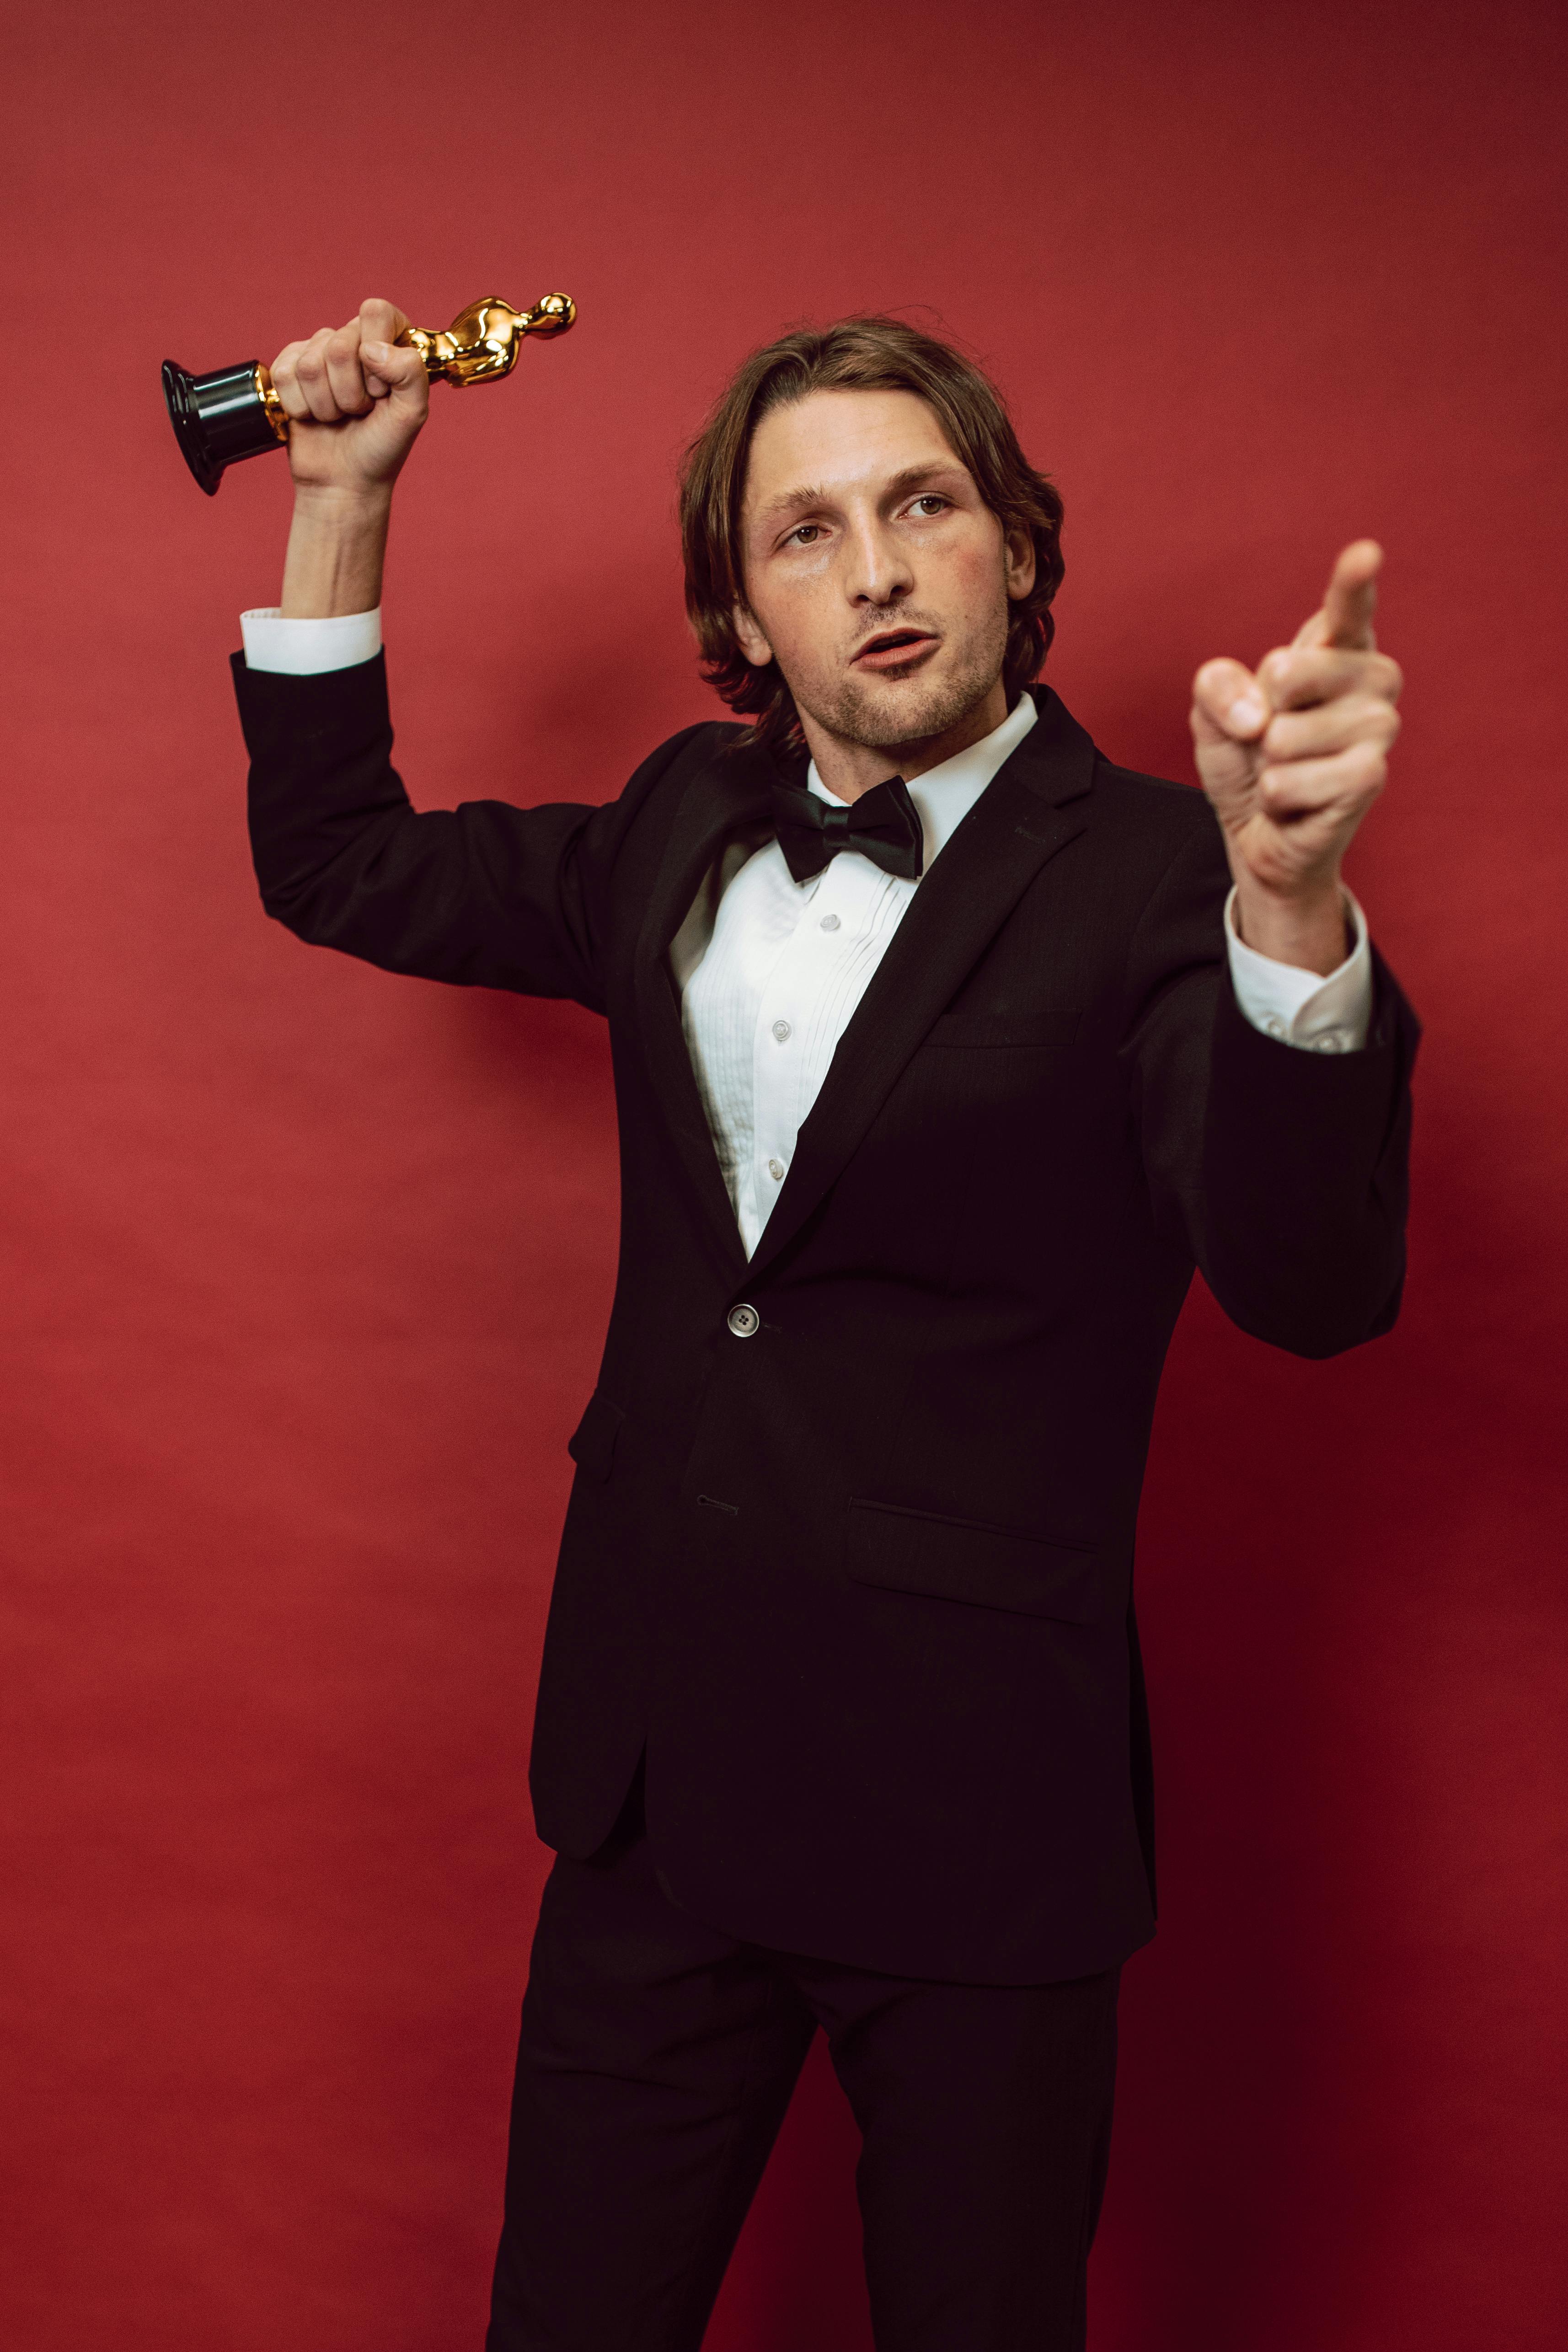 a man in a black suit holding a trophy and pointing with his finger